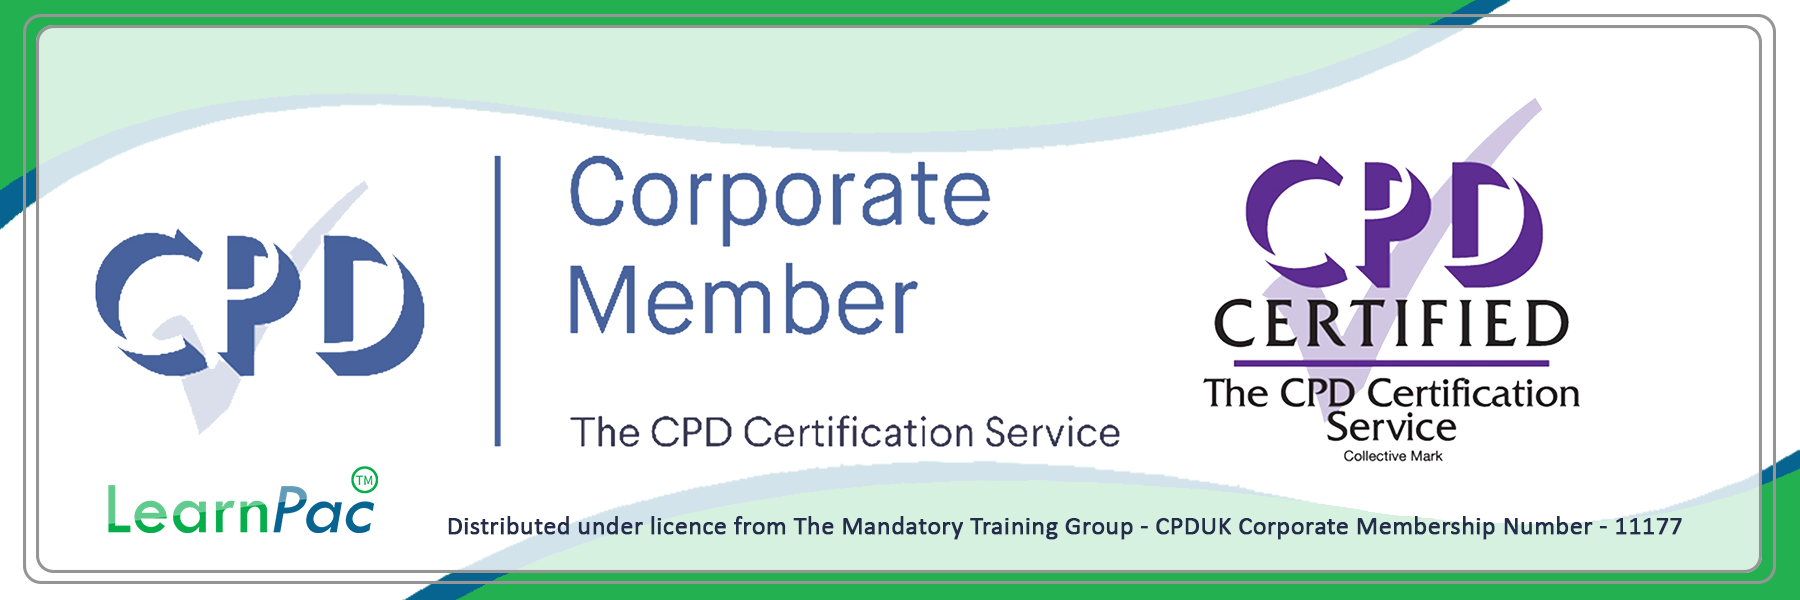 Moving and Assisting for Volunteers - Online Training Course - CPDUK Certified - Learnpac System UK - (2)